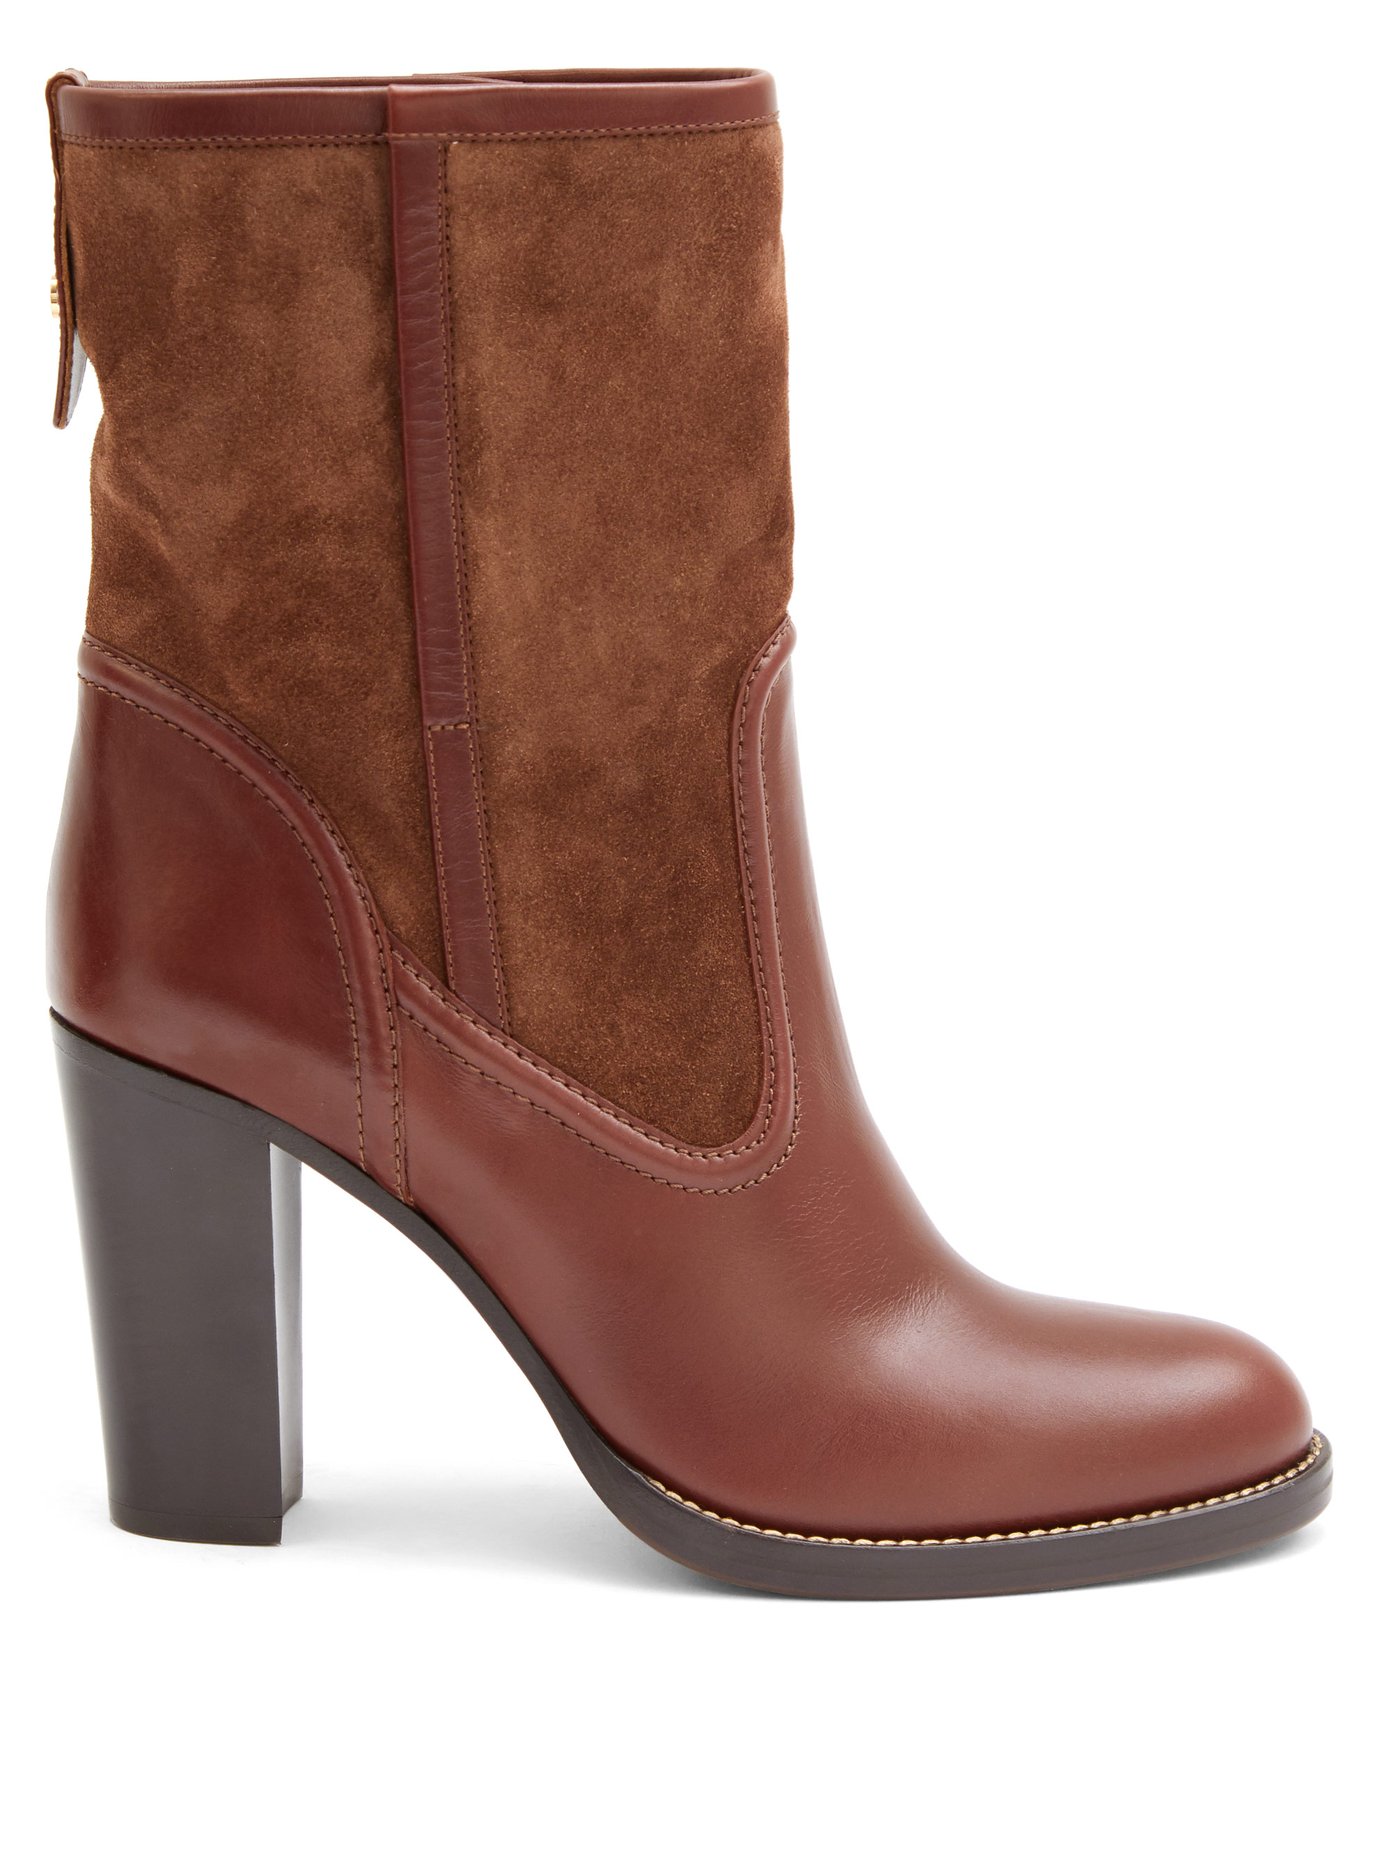 Suede and leather ankle boots | Chloé 